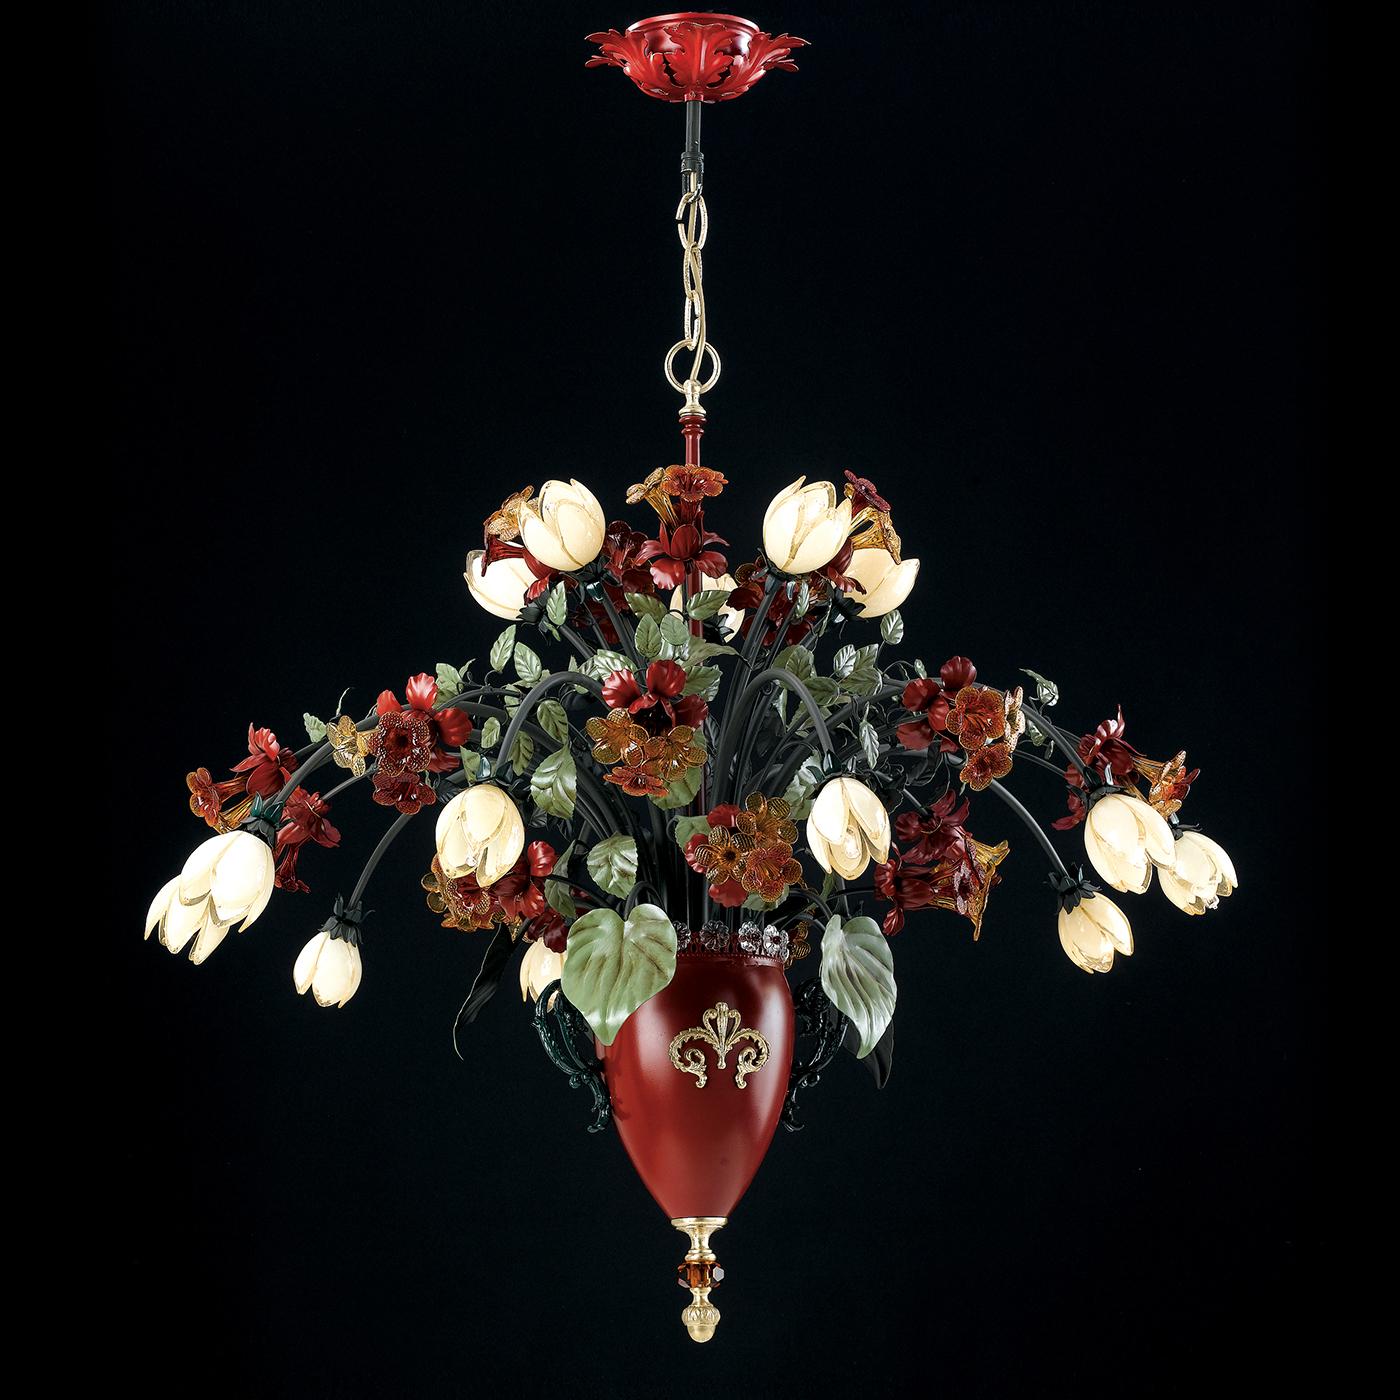 Designed to represent a spectacular hanging vase, this stunning 15 Lights Chandelier is crafted in hand-decorated metal and features amber colored murano glass. The striking Murano glass flowers in a two-tone amber and red coloring bring an element